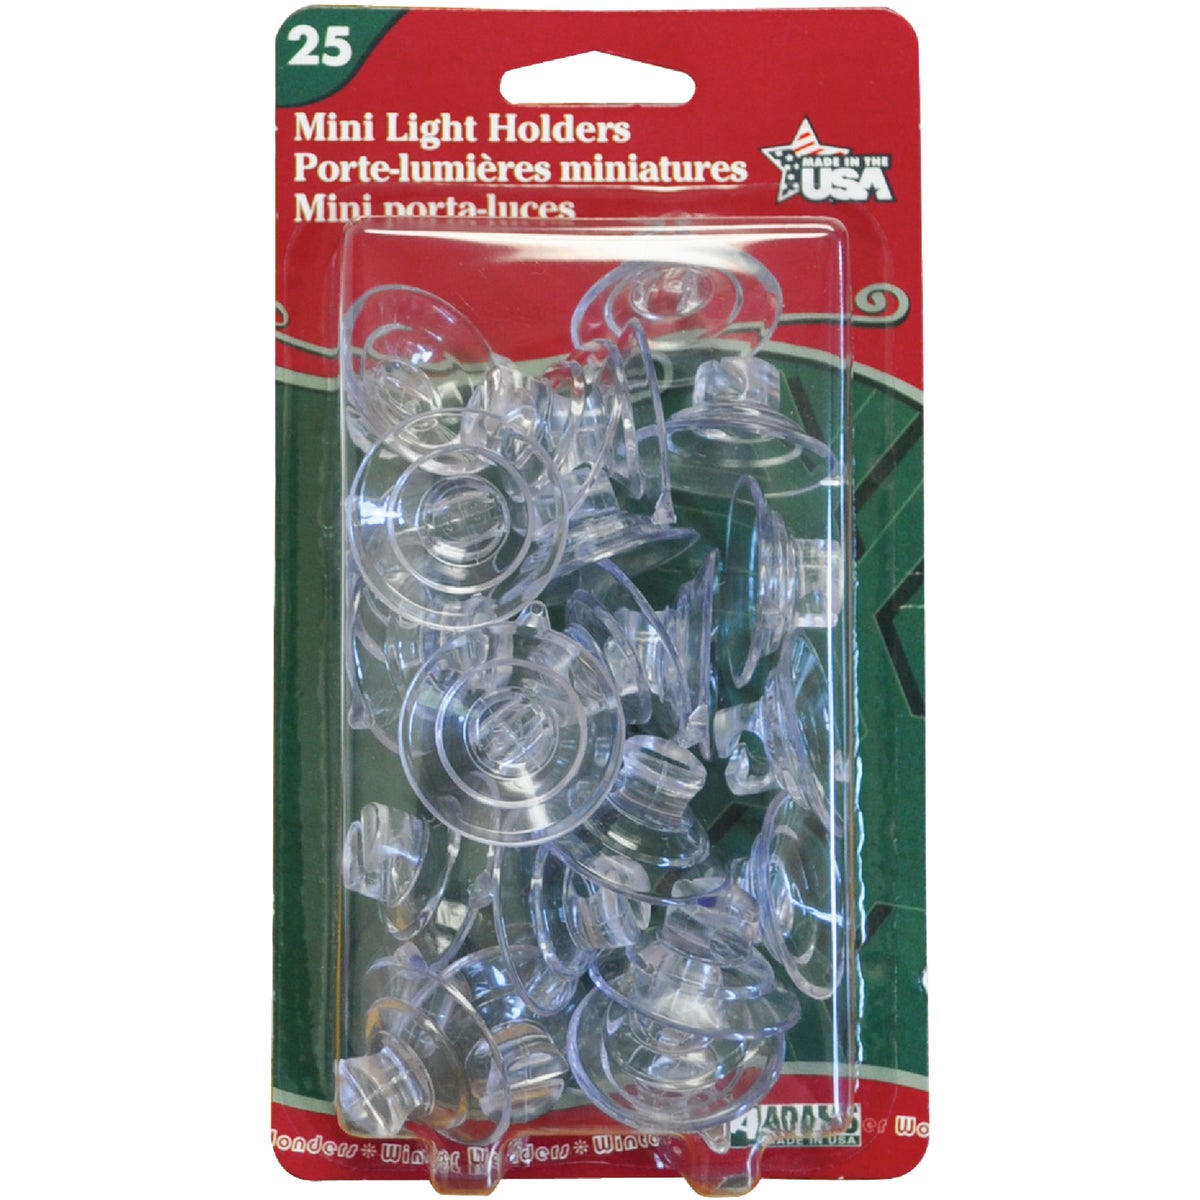 Item 901091, Suction cups for stringing lights in windows. Unique design uses no hooks.